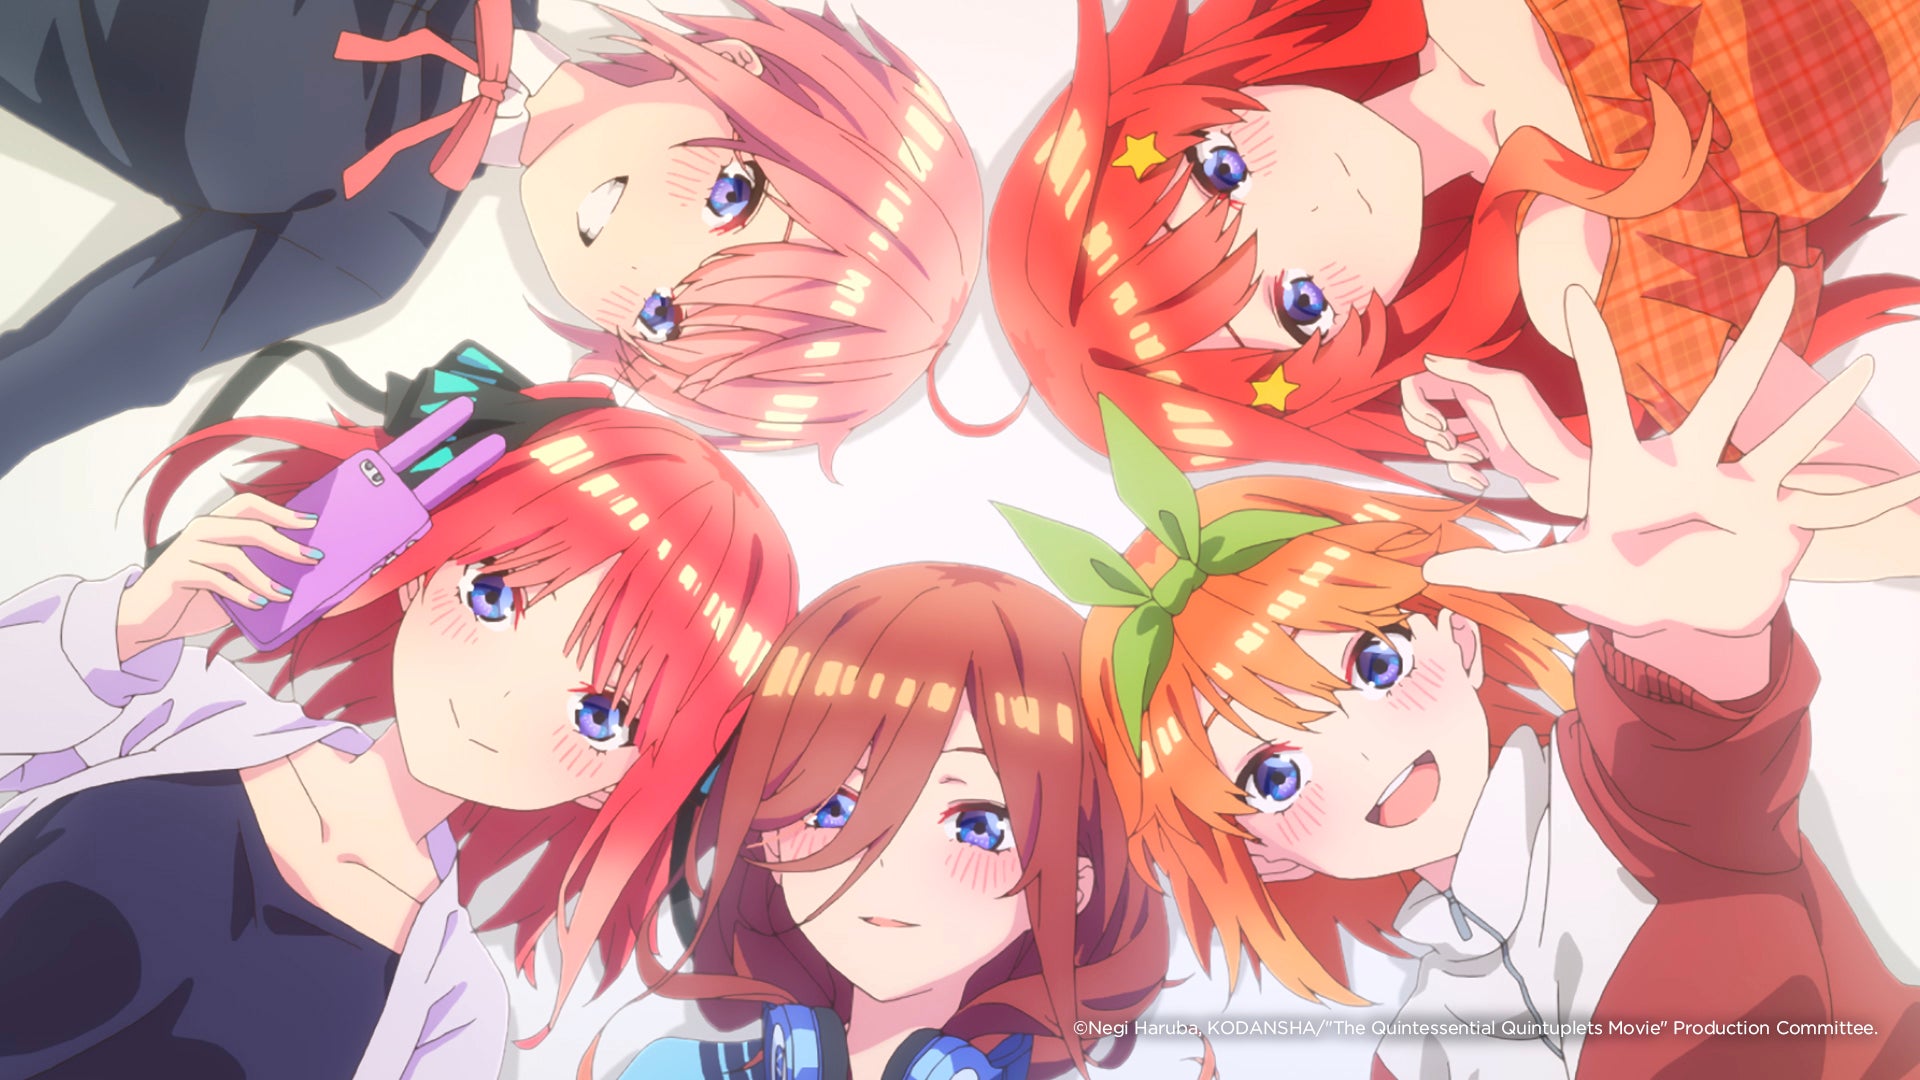 10 Anime Like The Quintessential Quintuplets Movie | Anime-Planet